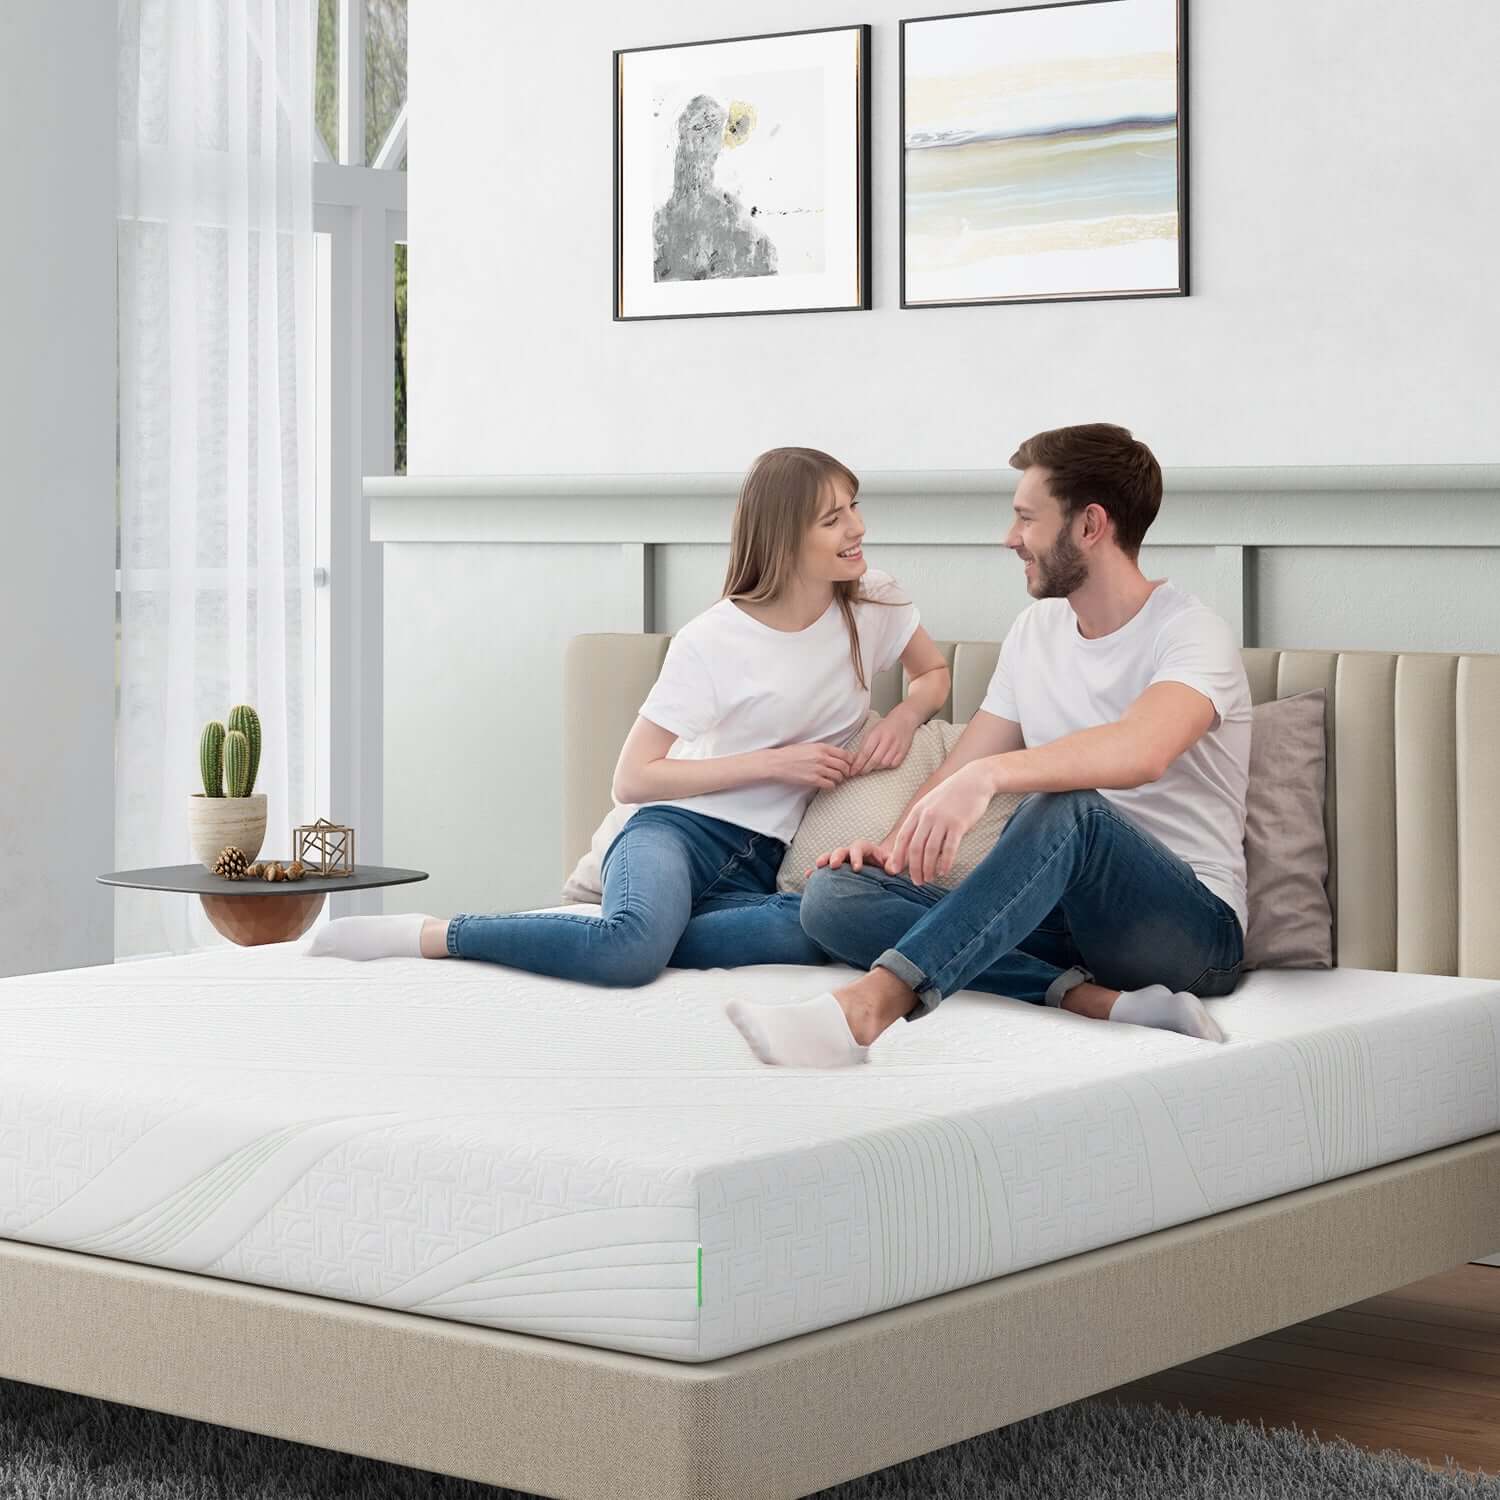 Queen vs. King Size Mattress - Which Mattress Size is Better for You?